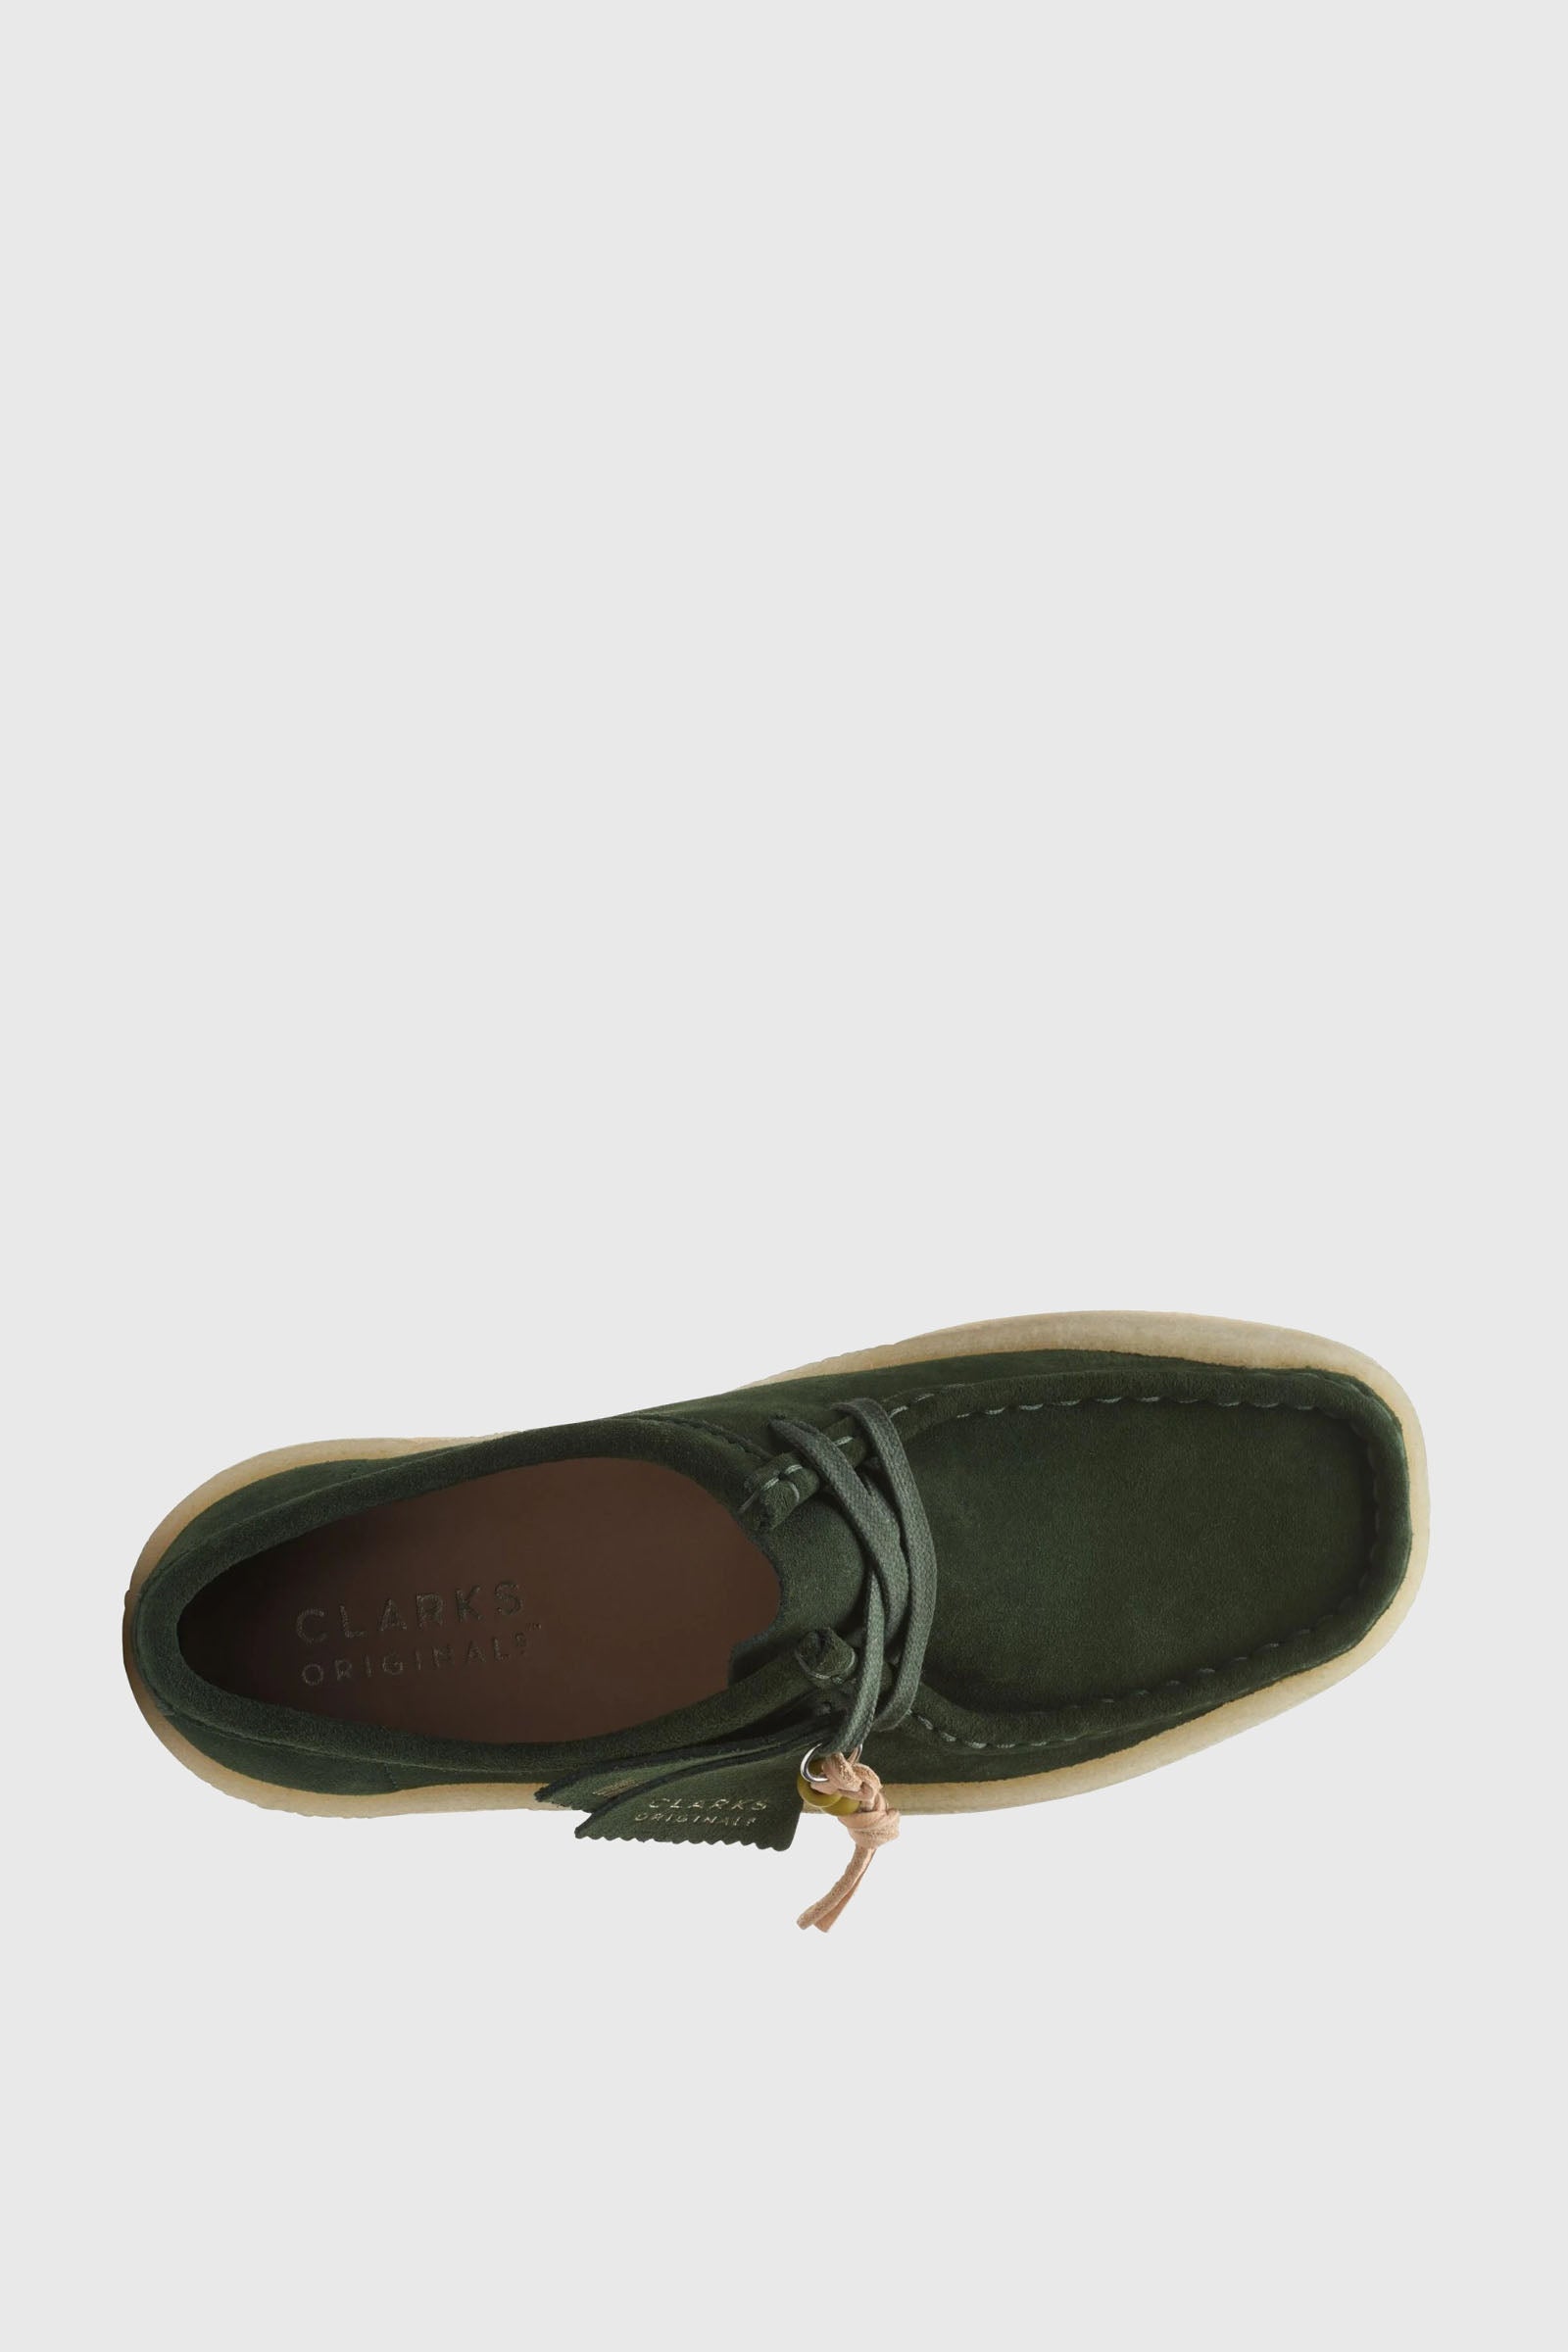 Clarks Wallabee Cup Leather Shoes in Dark Green/Dark Green - 6